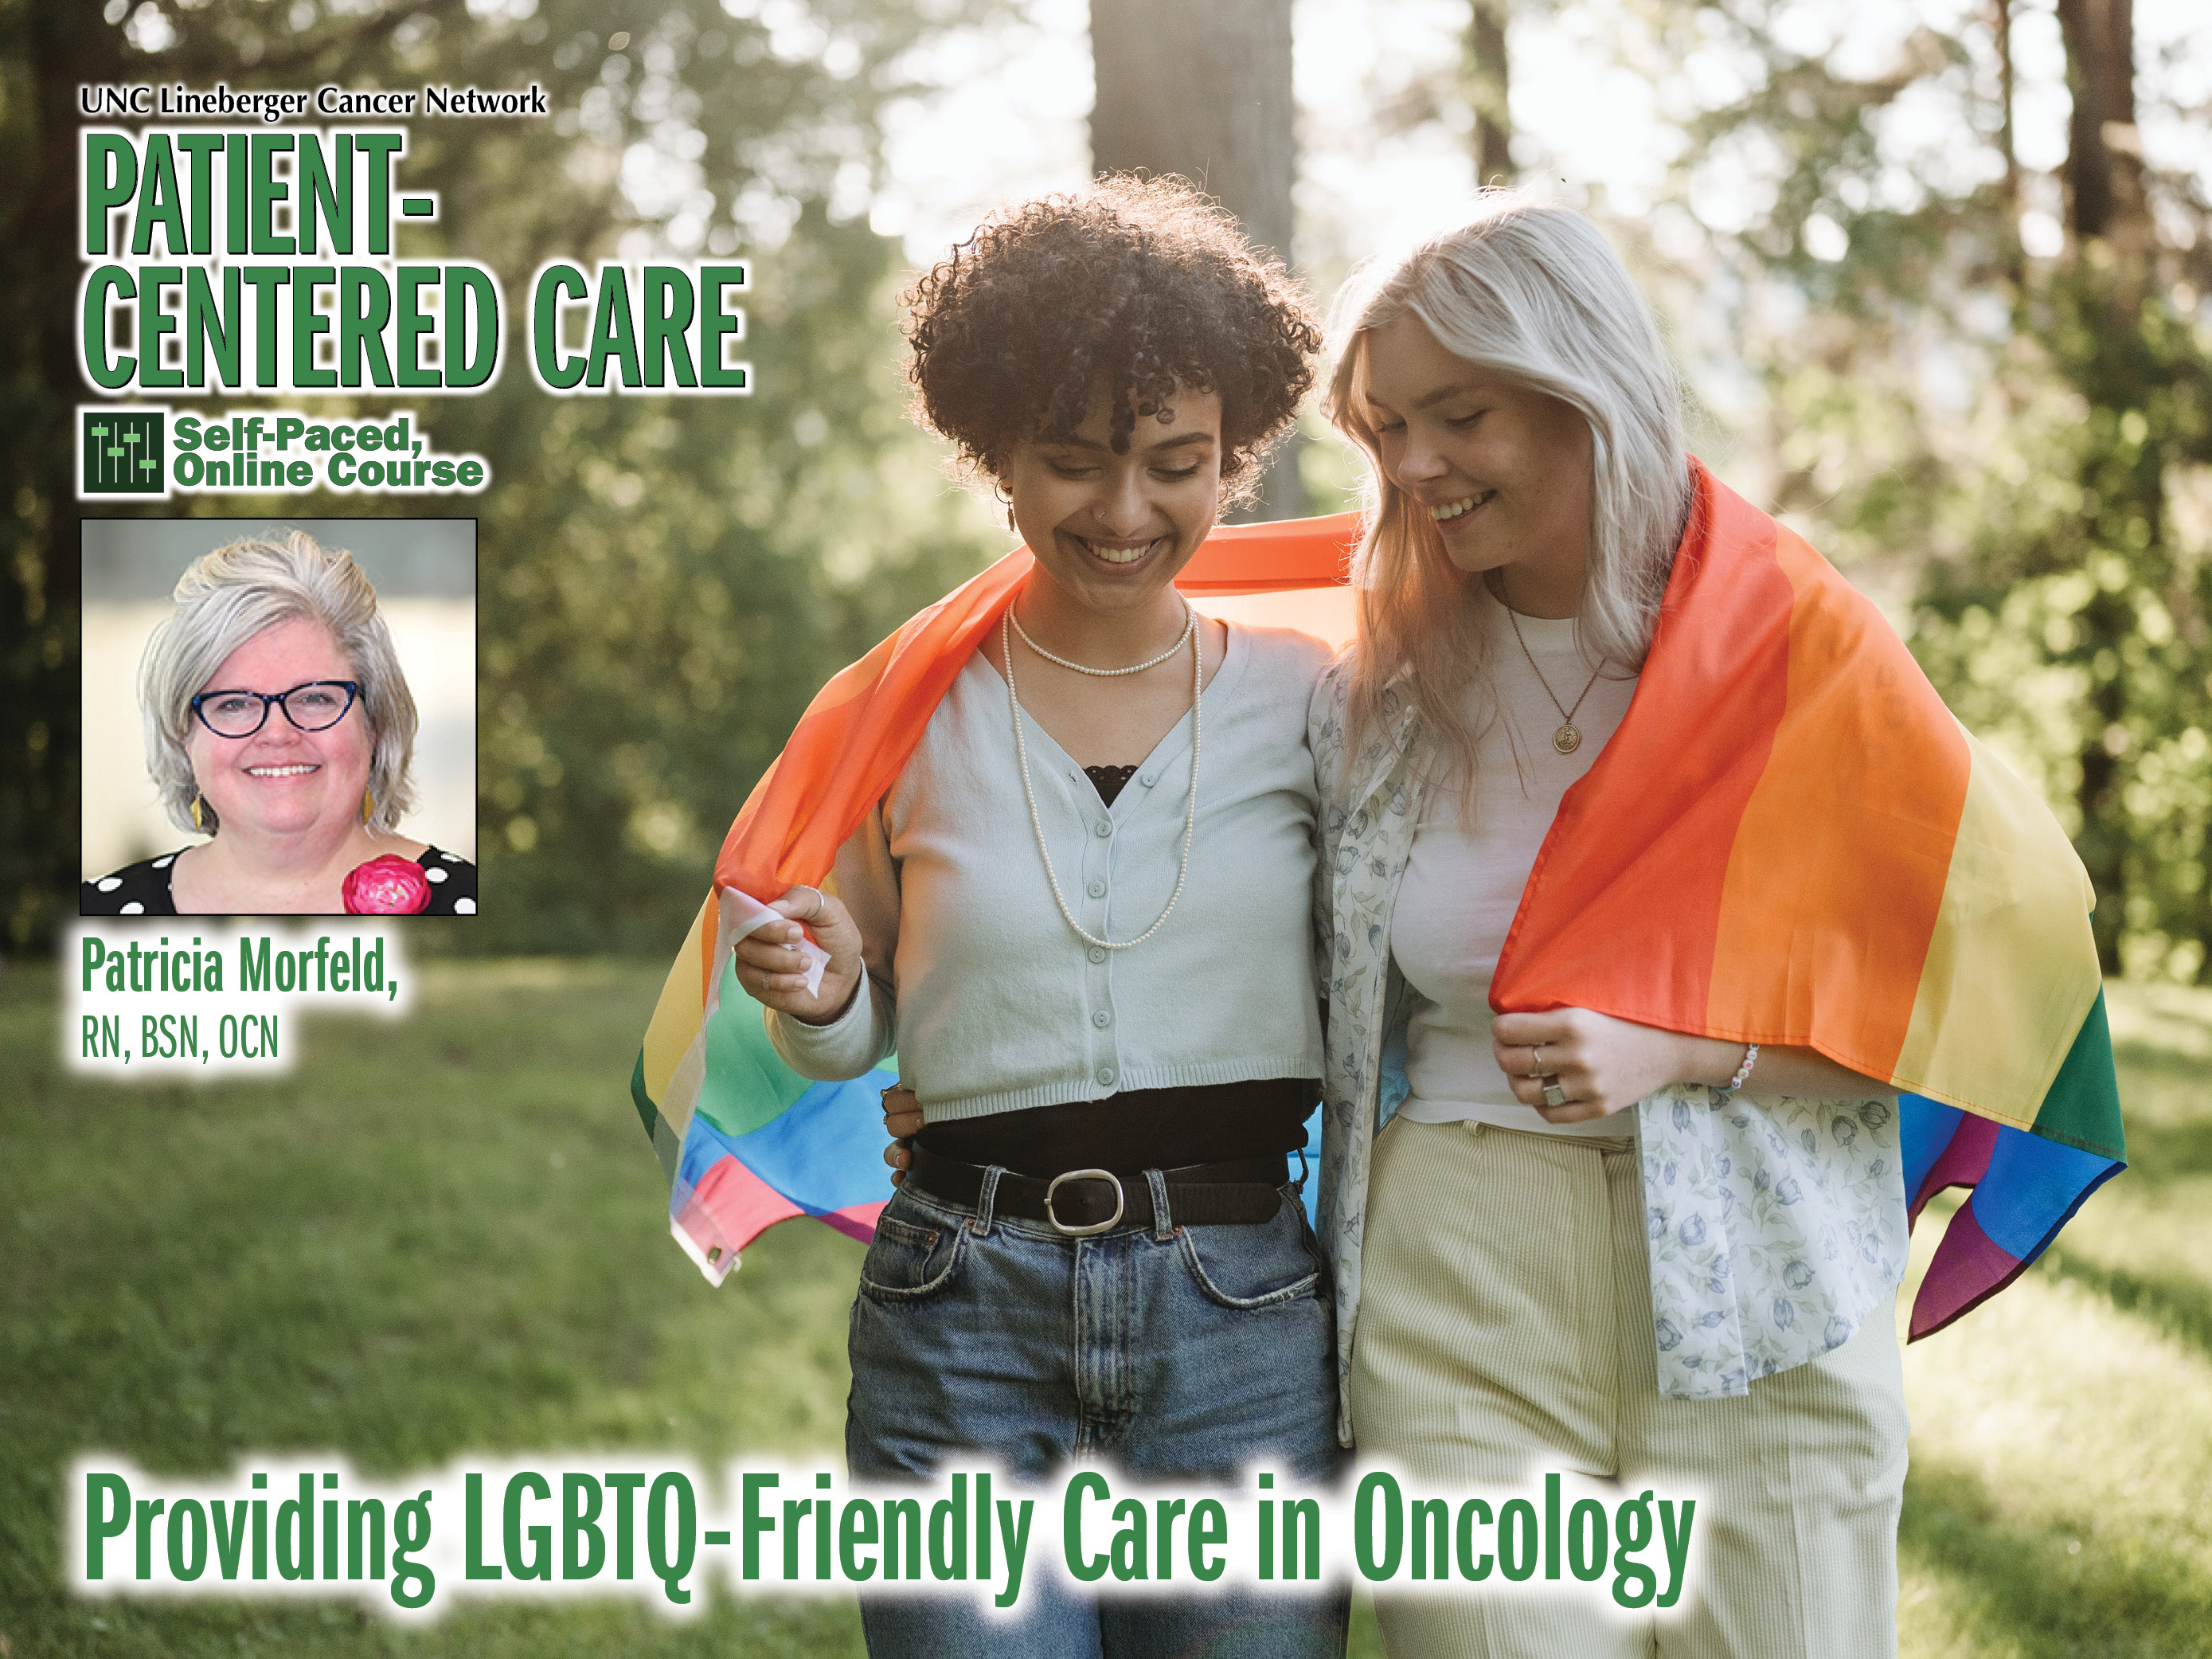 Providing LGBTQ Friendly Care in Oncology